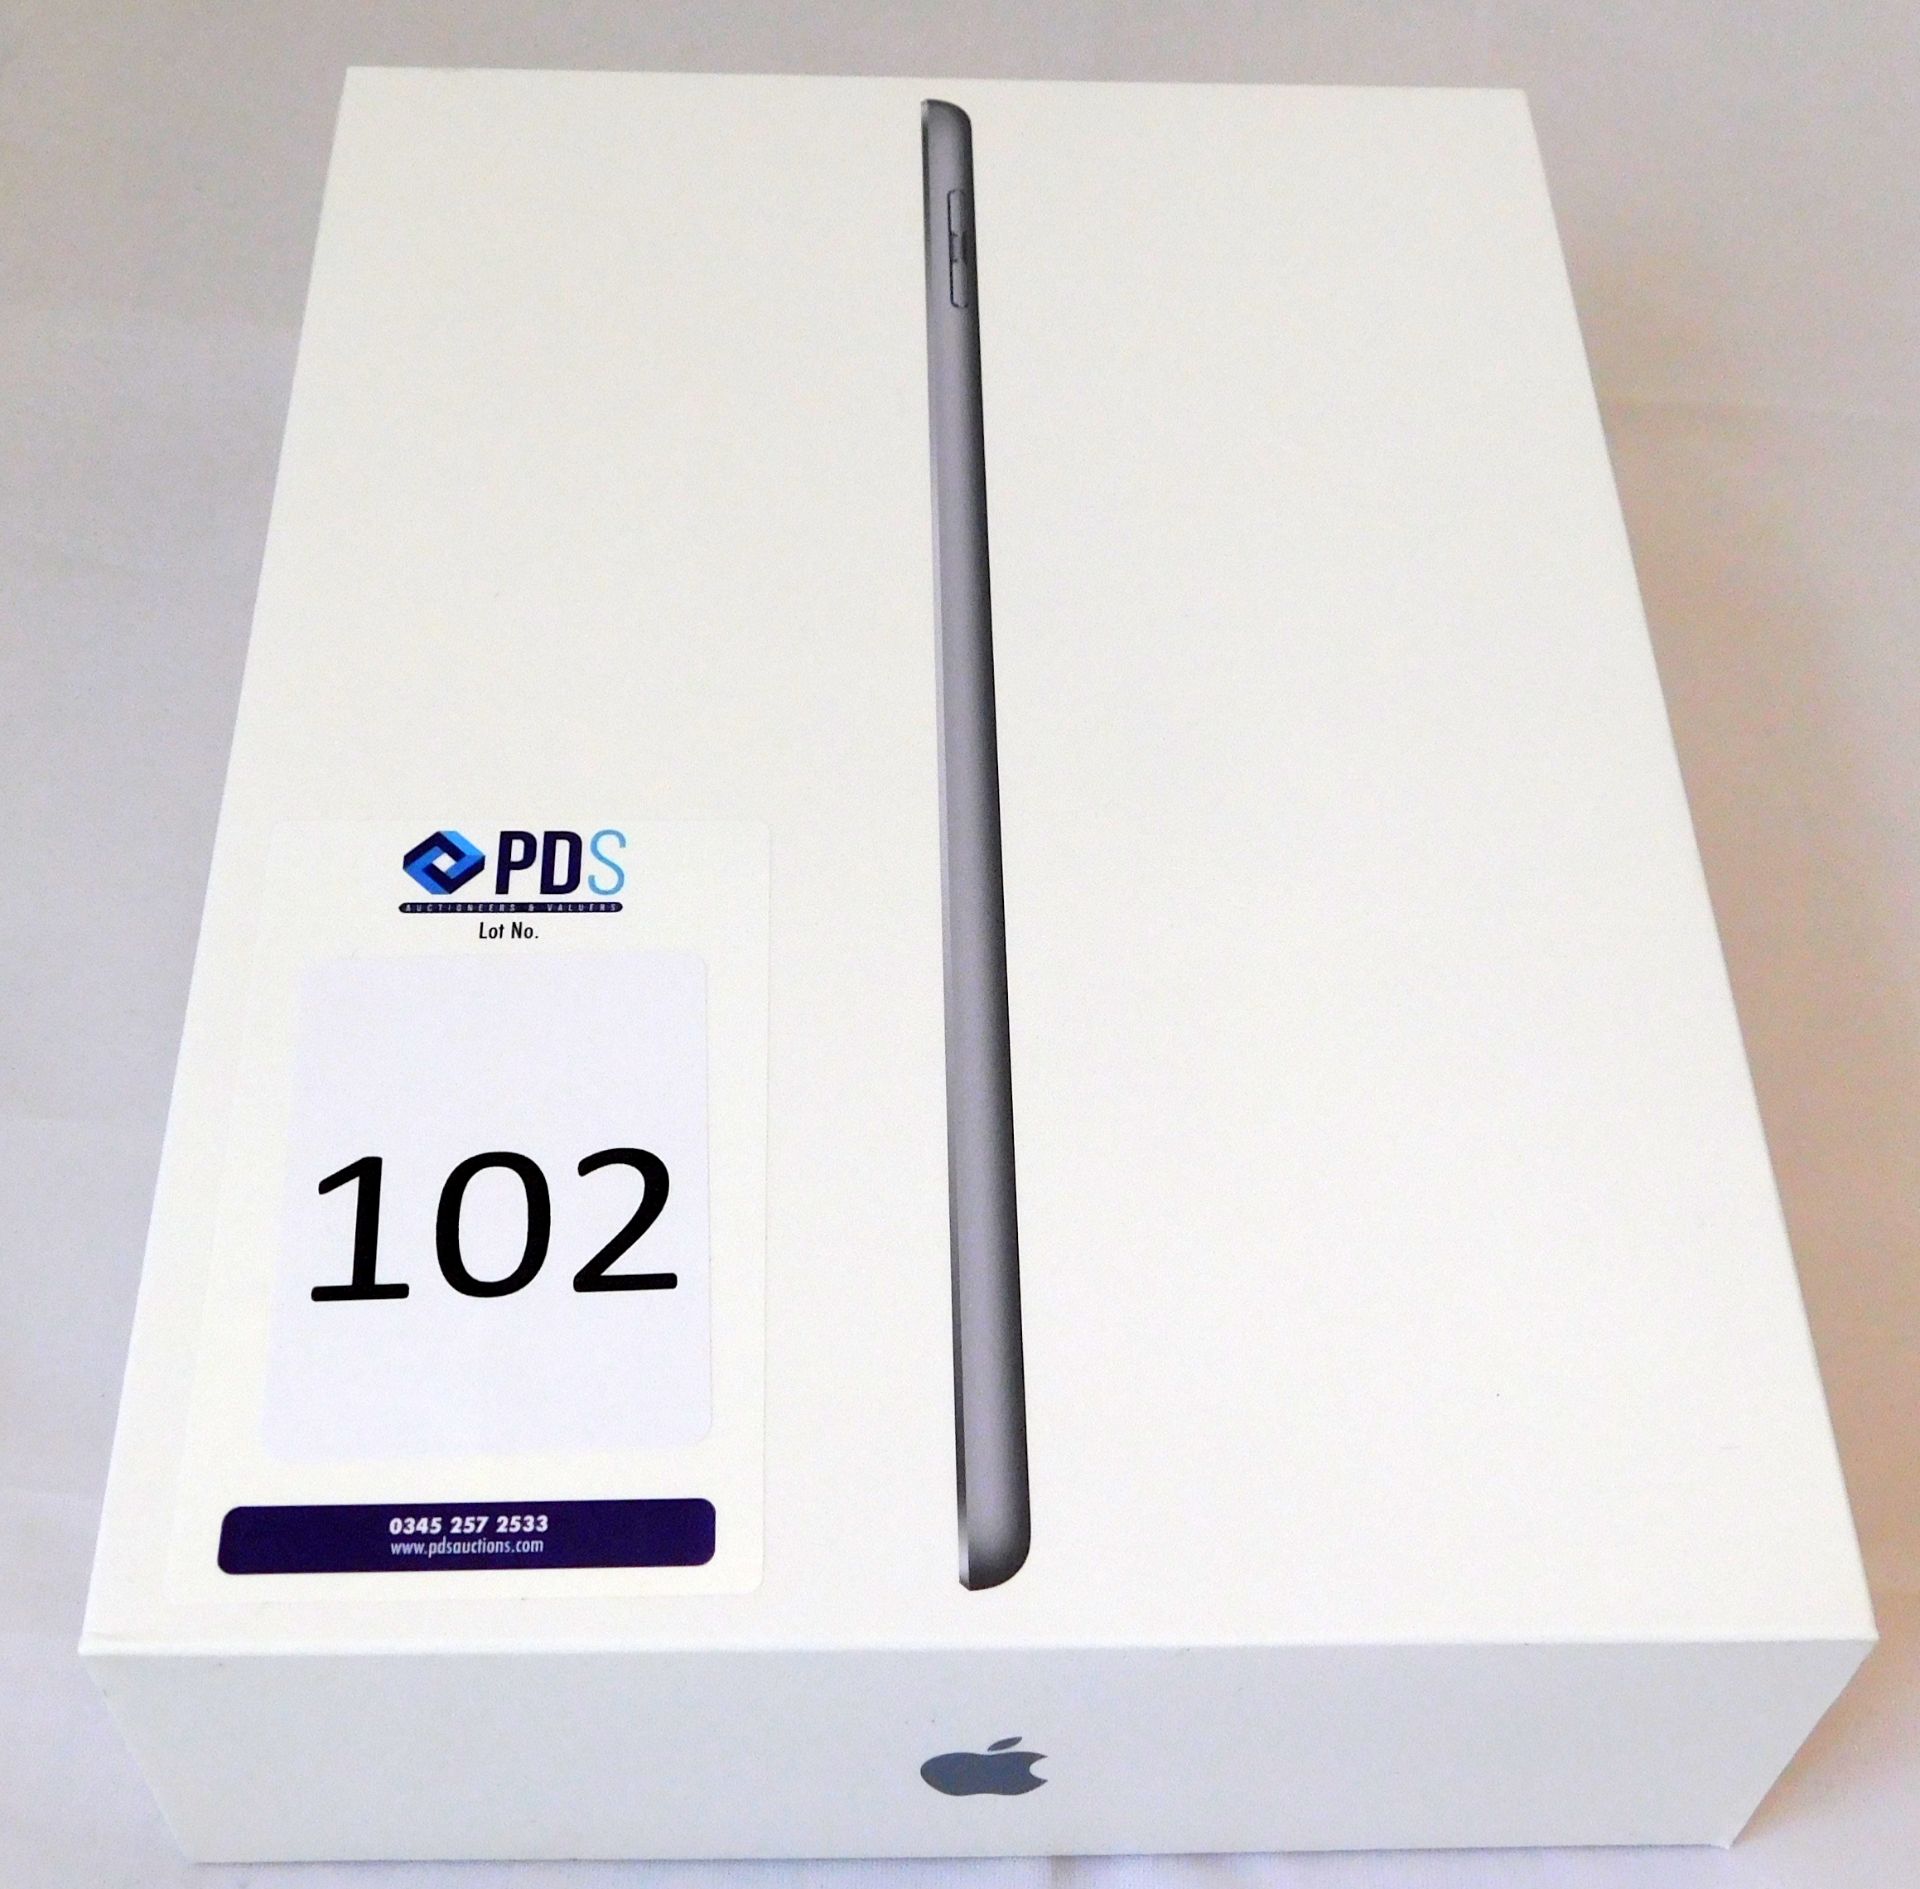 Apple A1893 iPad, 6th Gen, 32GB, Space Grey, Serial Number: F9FY2569JF8J, (New in Box) (Located